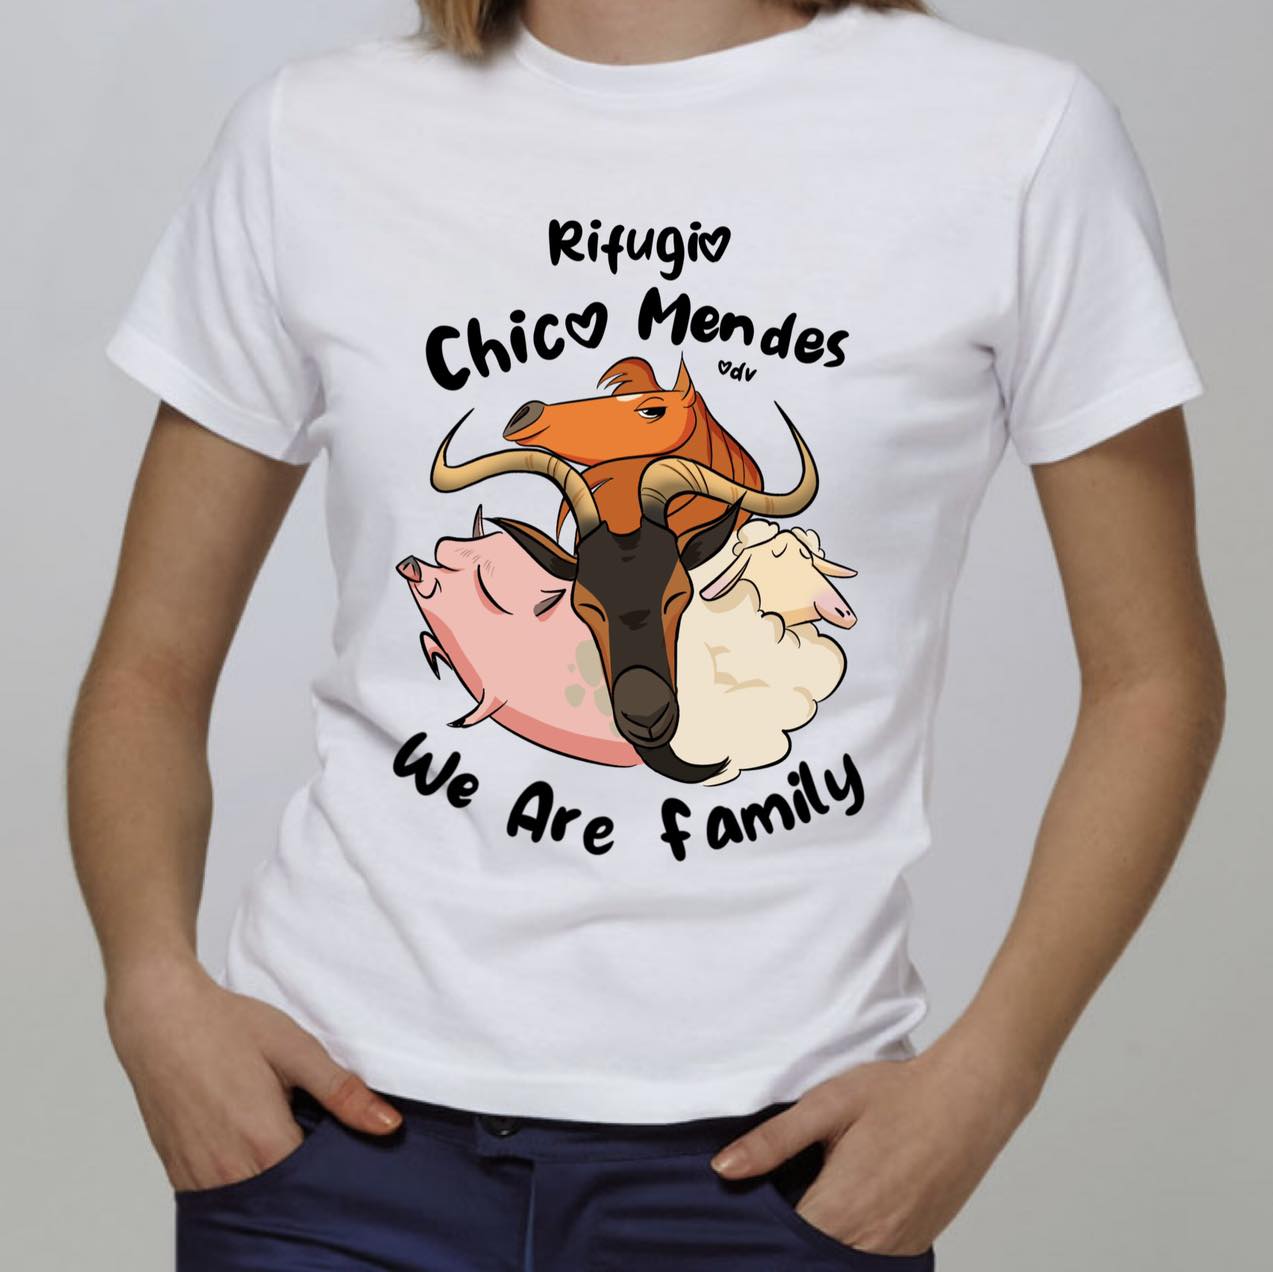 T-shirt "We are family"